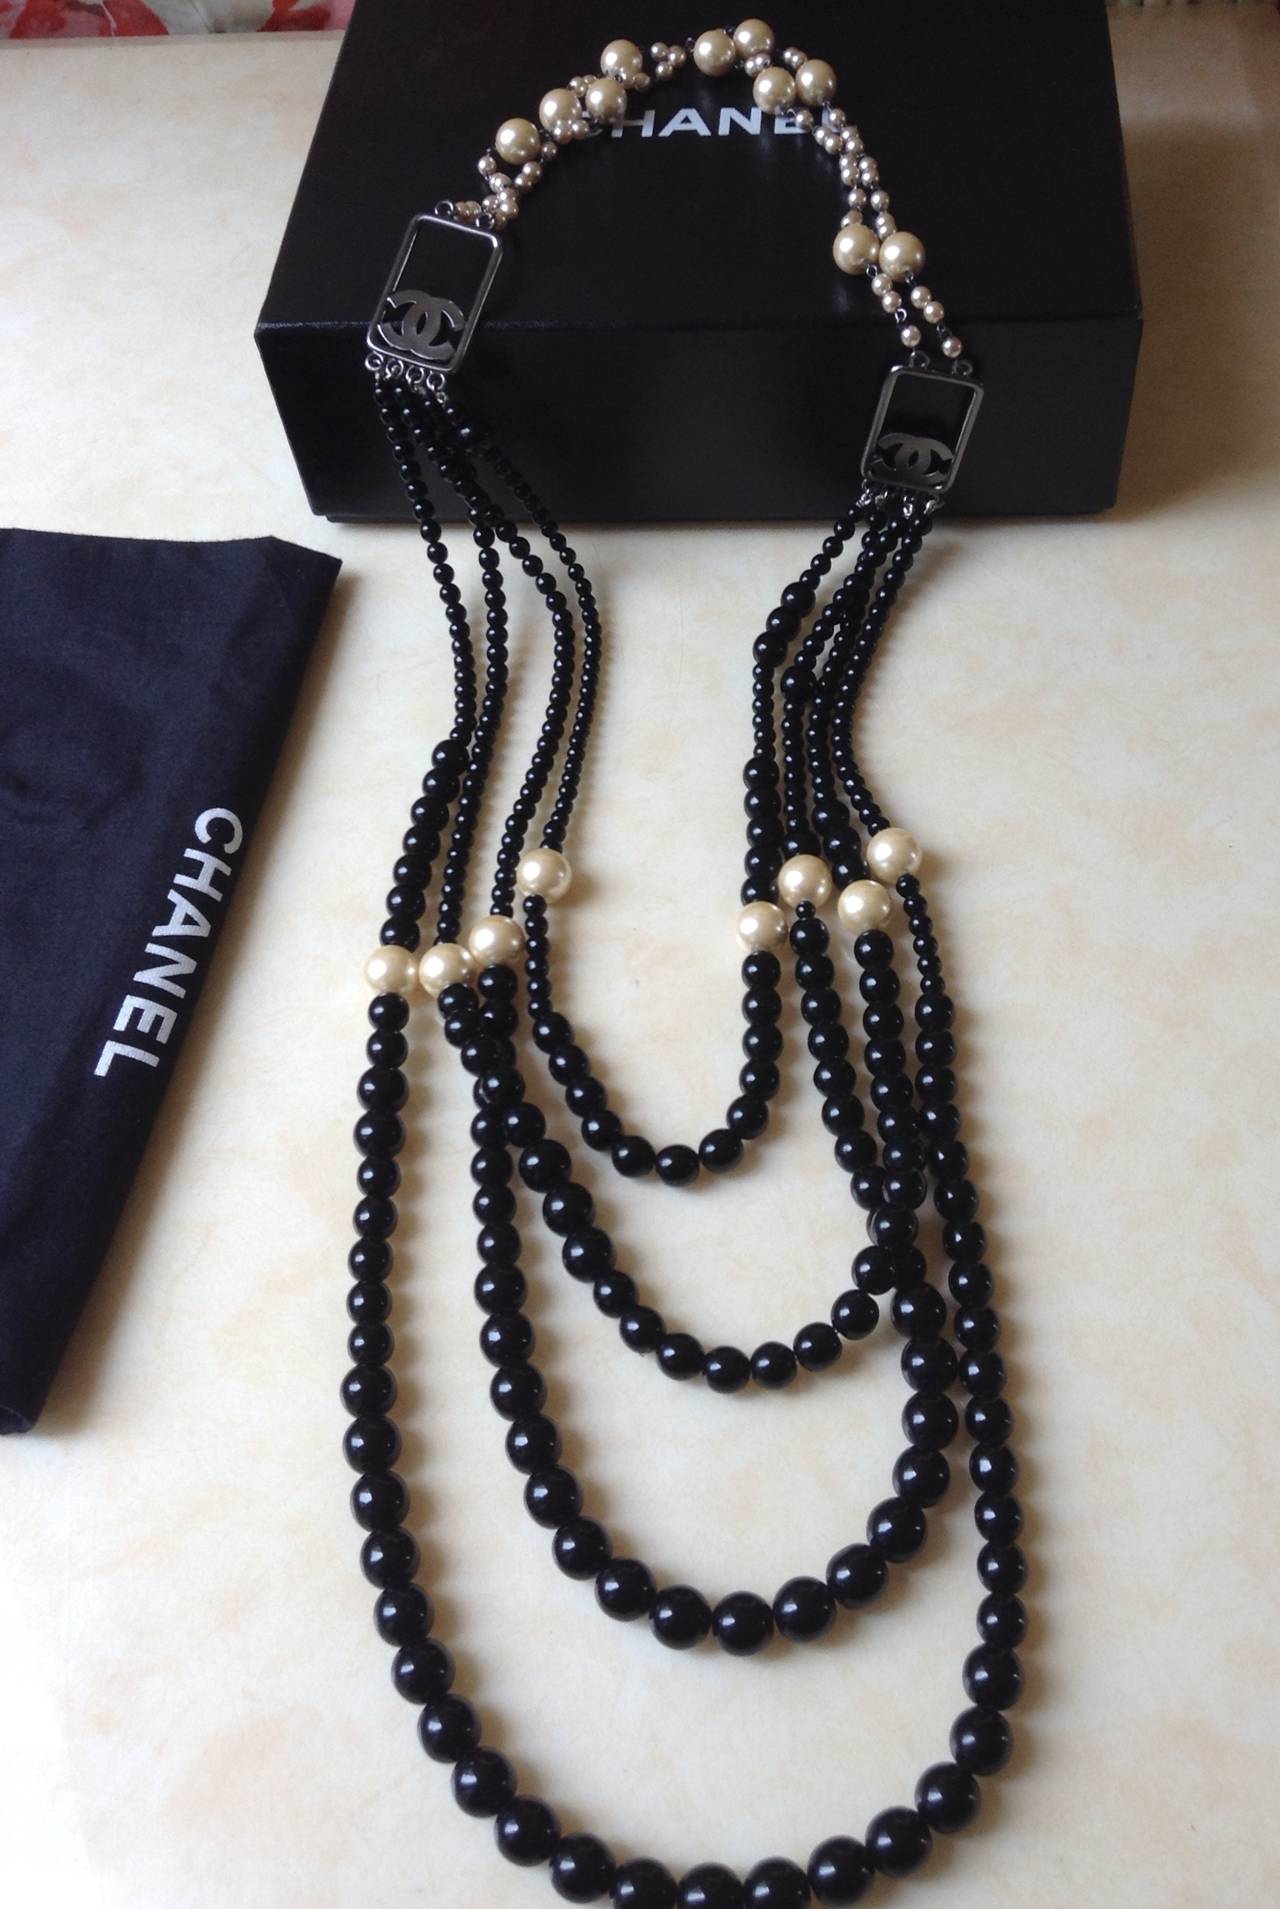 PRISTINE 03P Chanel ✿*ﾟRUNWAY 4 STRANDS 2-WAY Black Glass Pearl Long Necklace For Sale 1